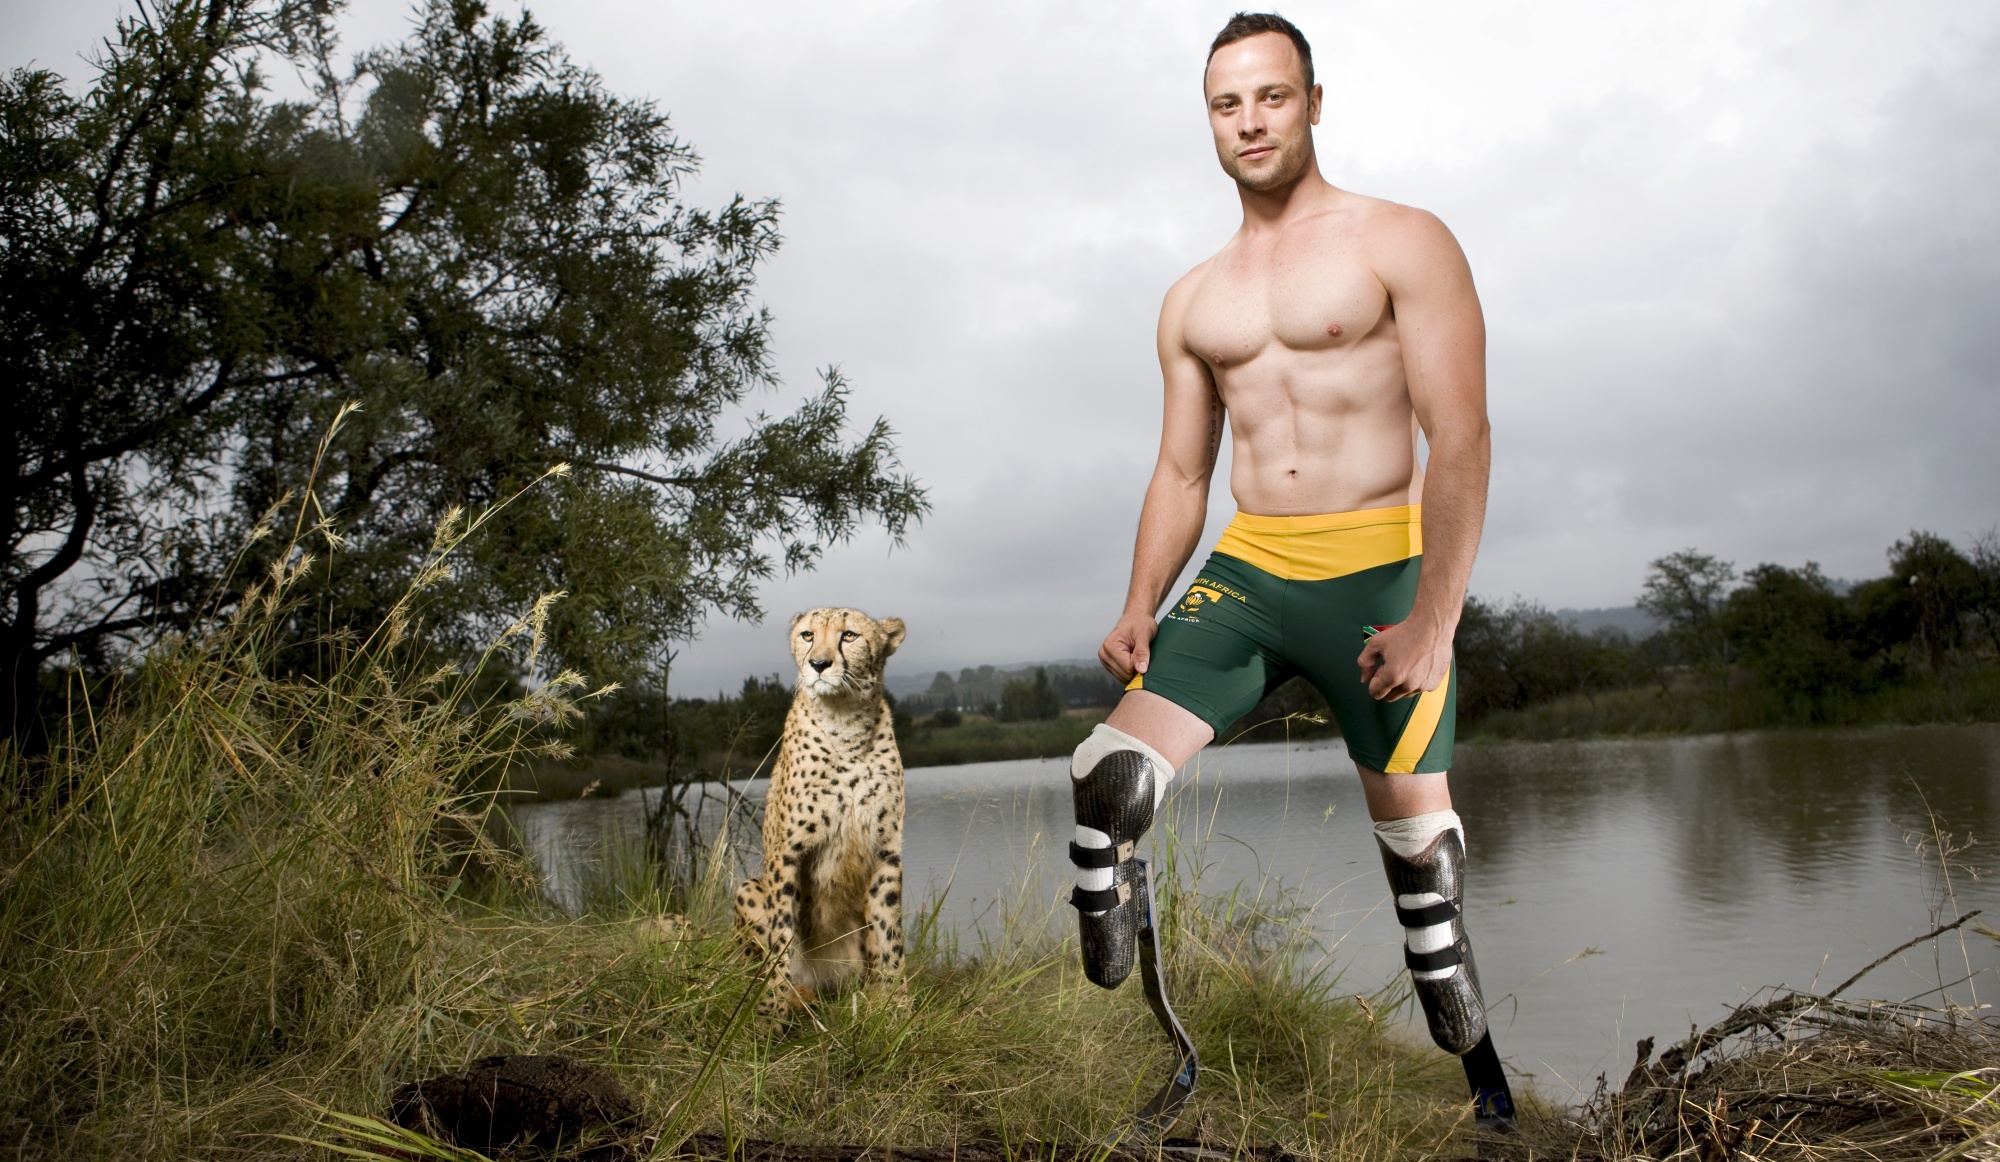 Once a gold medal winner at the Paralympics, murder accused Oscar Pistorius now shies awa...